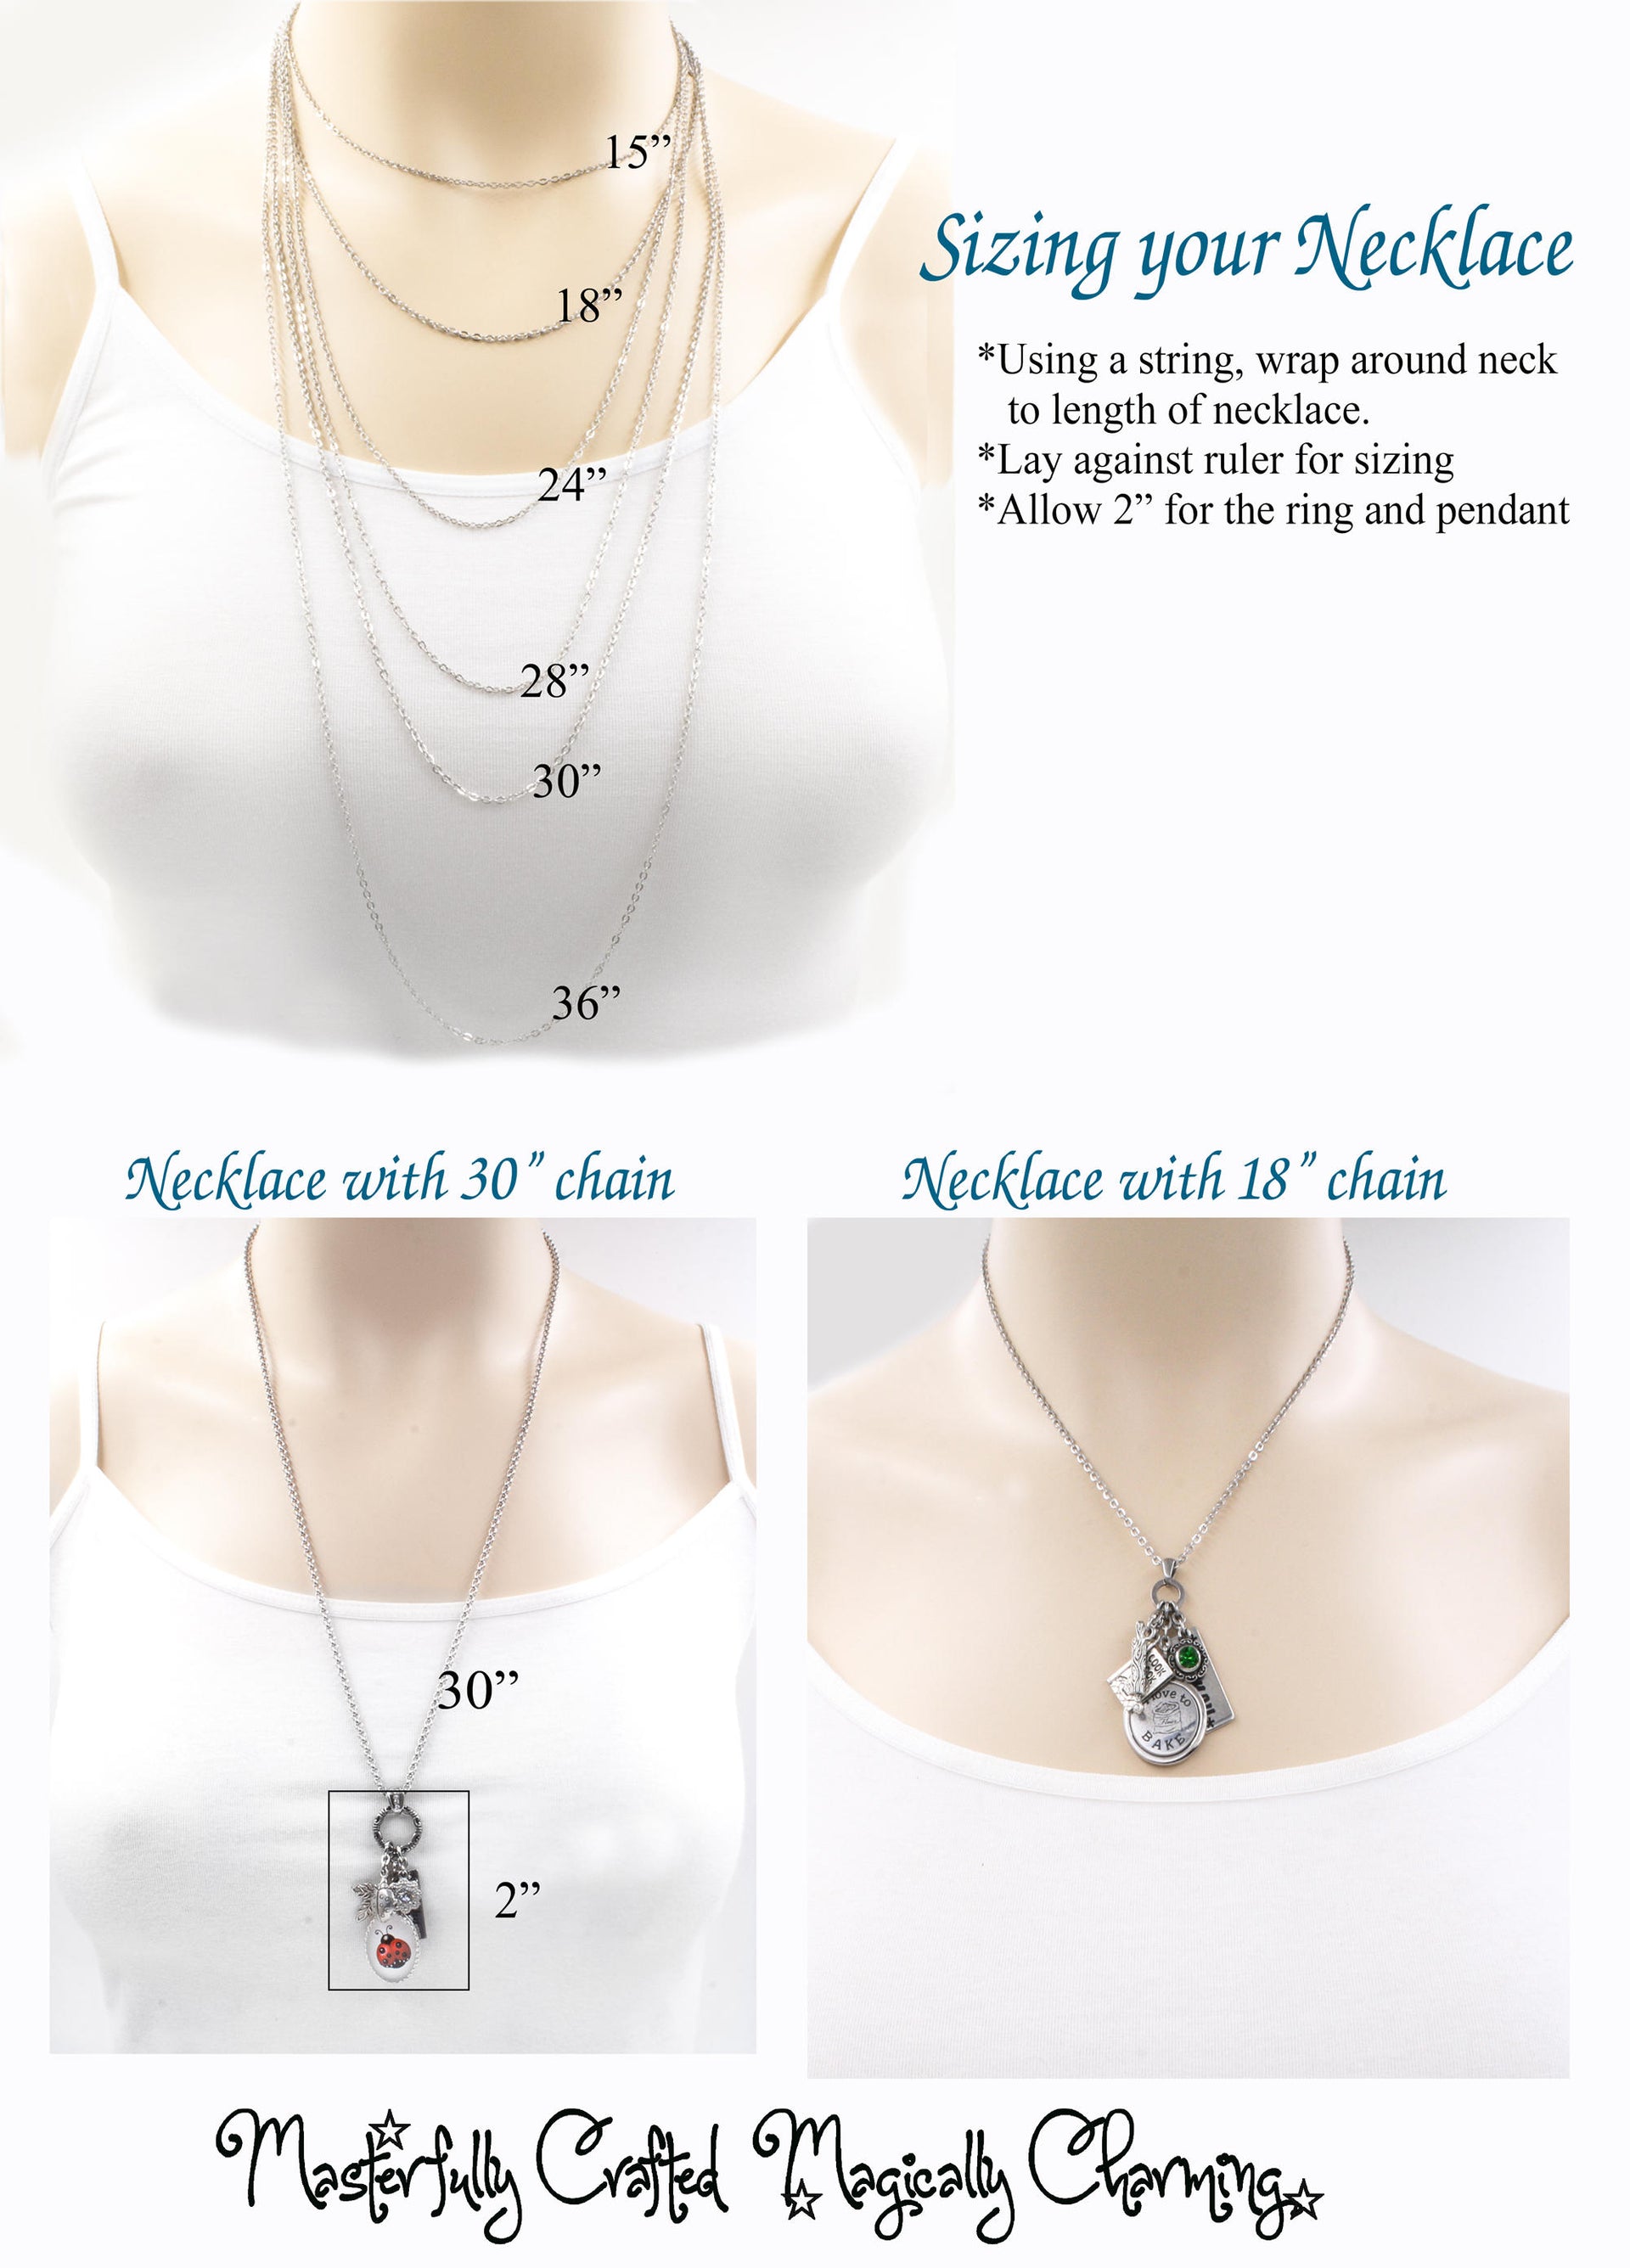 brother and sister necklaces sizing